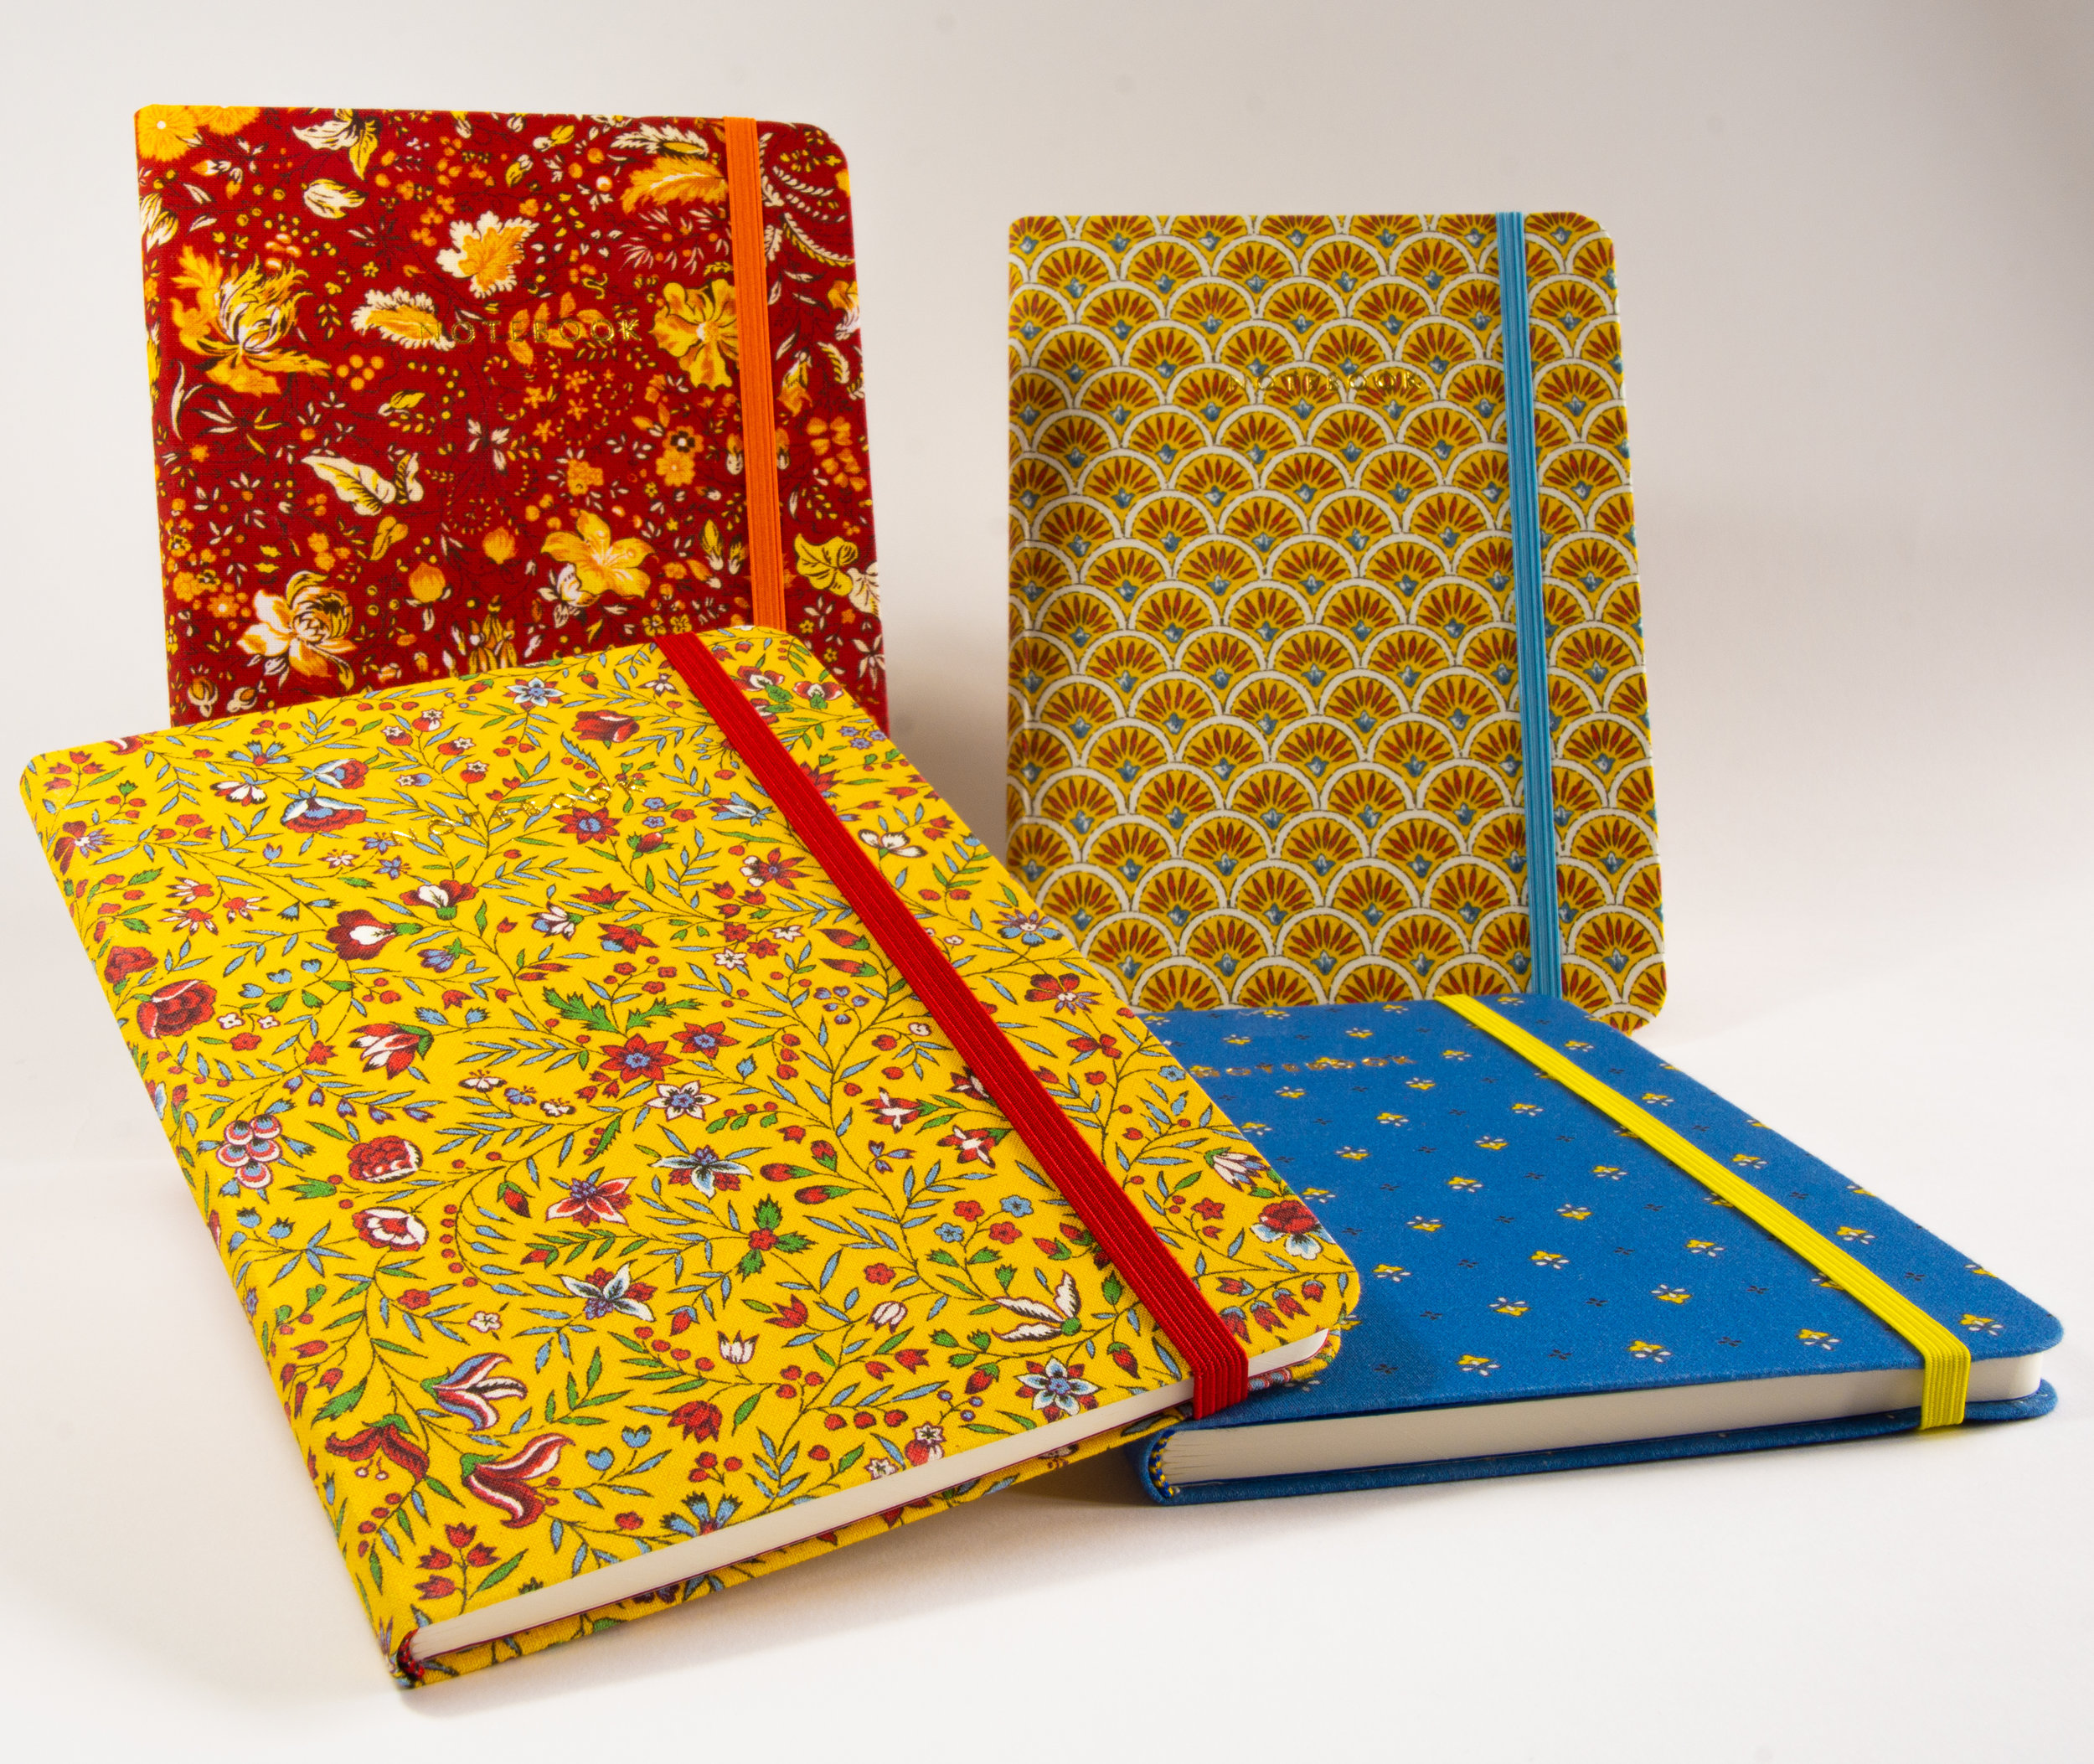 Provence notebooks group view.jpg